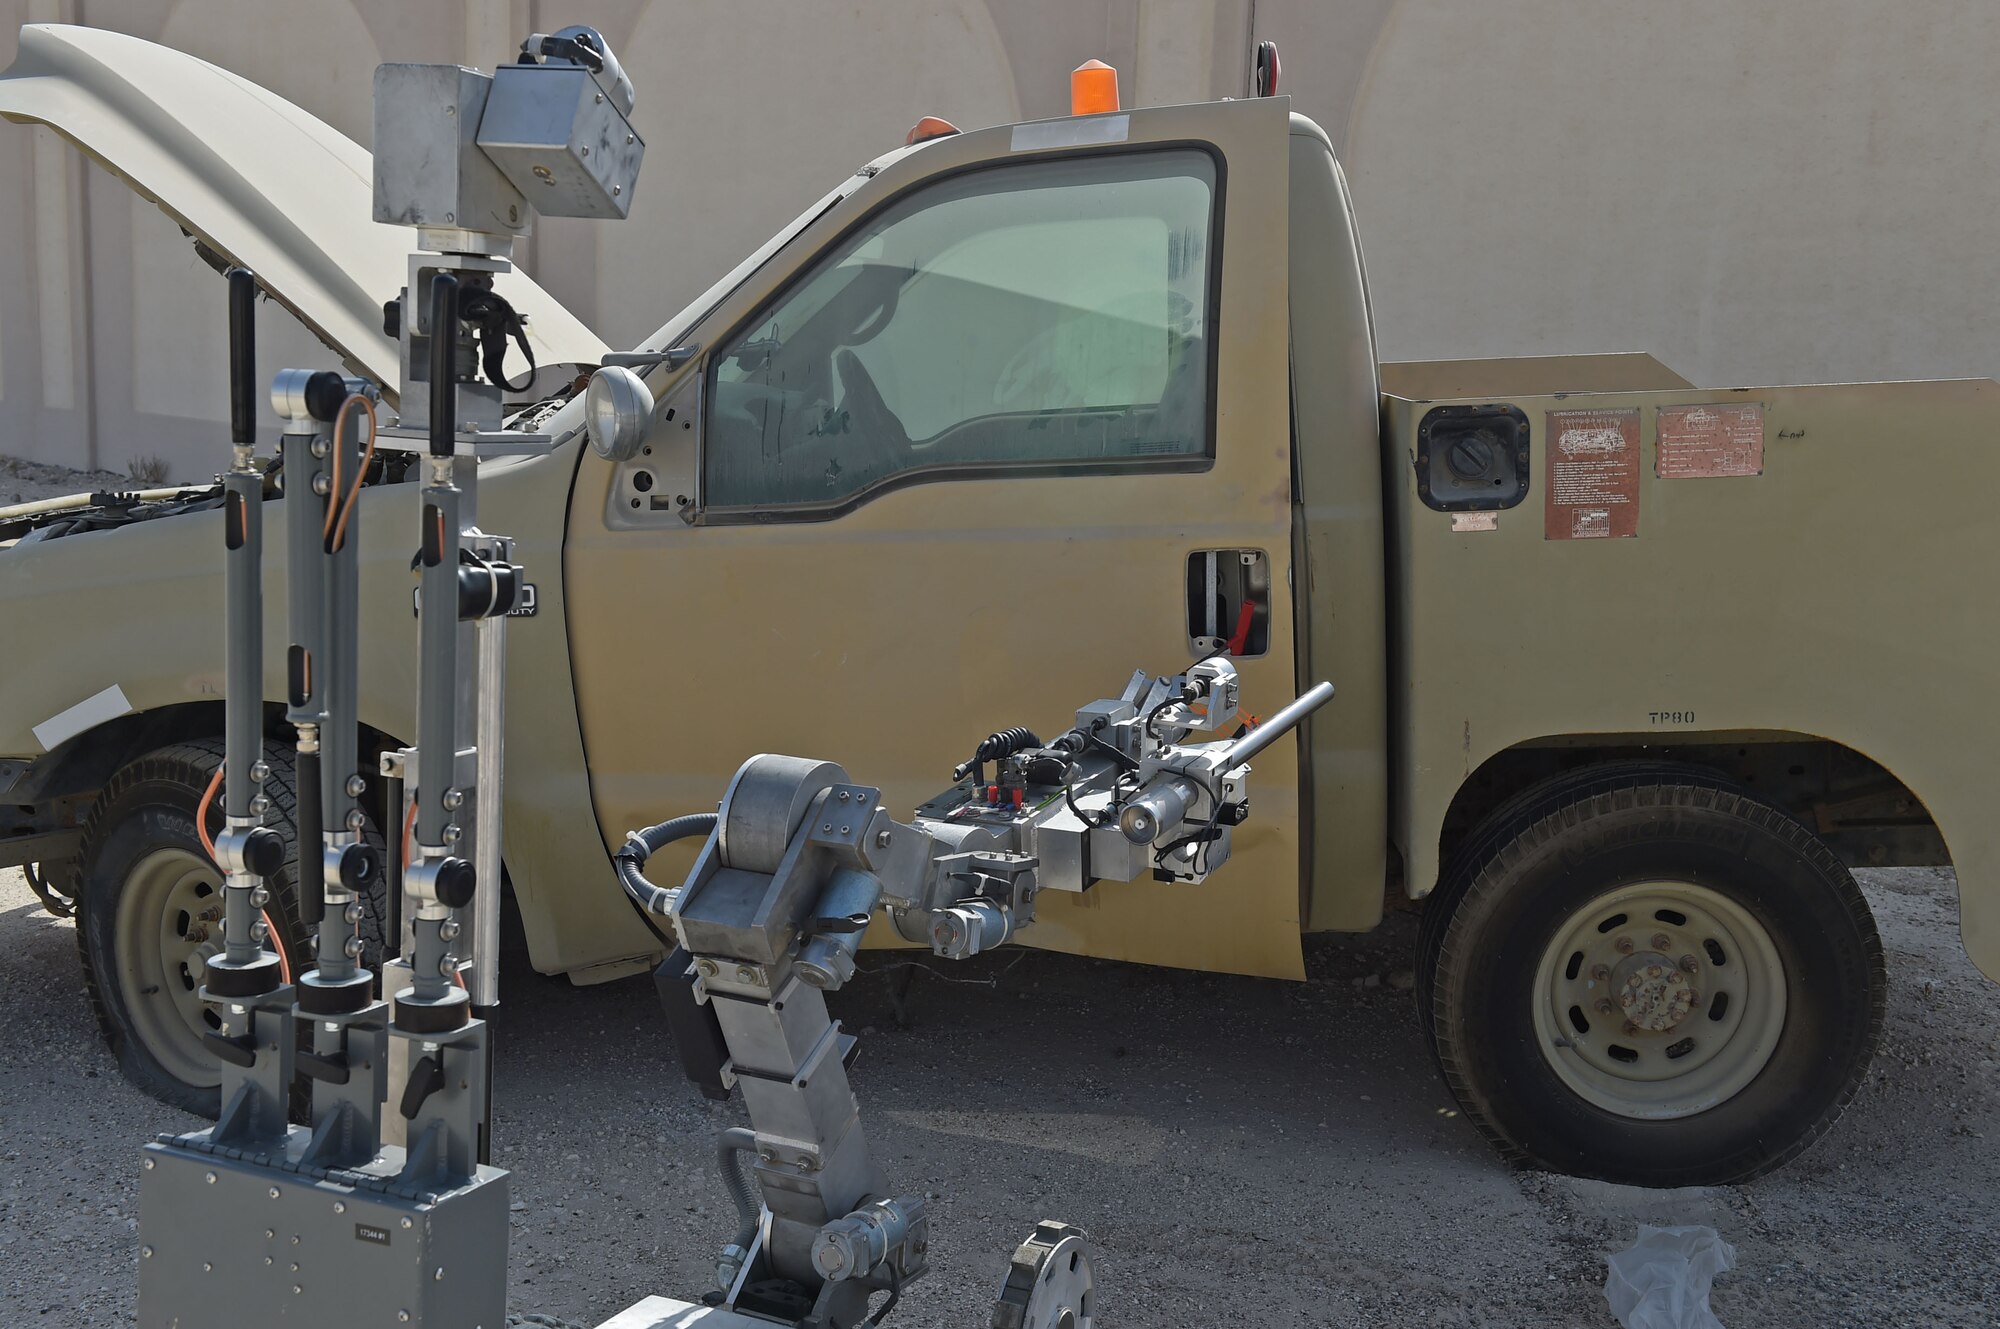 380th Expeditionary Explosive Ordnance Disposal technicians use a remotely controlled robot to inspect a vehicle that is suspected to contain explosive materials during training at an undisclosed location in Southwest Asia, Nov. 25, 2016. Several cameras mounted on the robot allow EOD controllers to visually inspect a scene without being in danger. (U.S. Air Force photo by Tech. Sgt. Christopher Carwile)